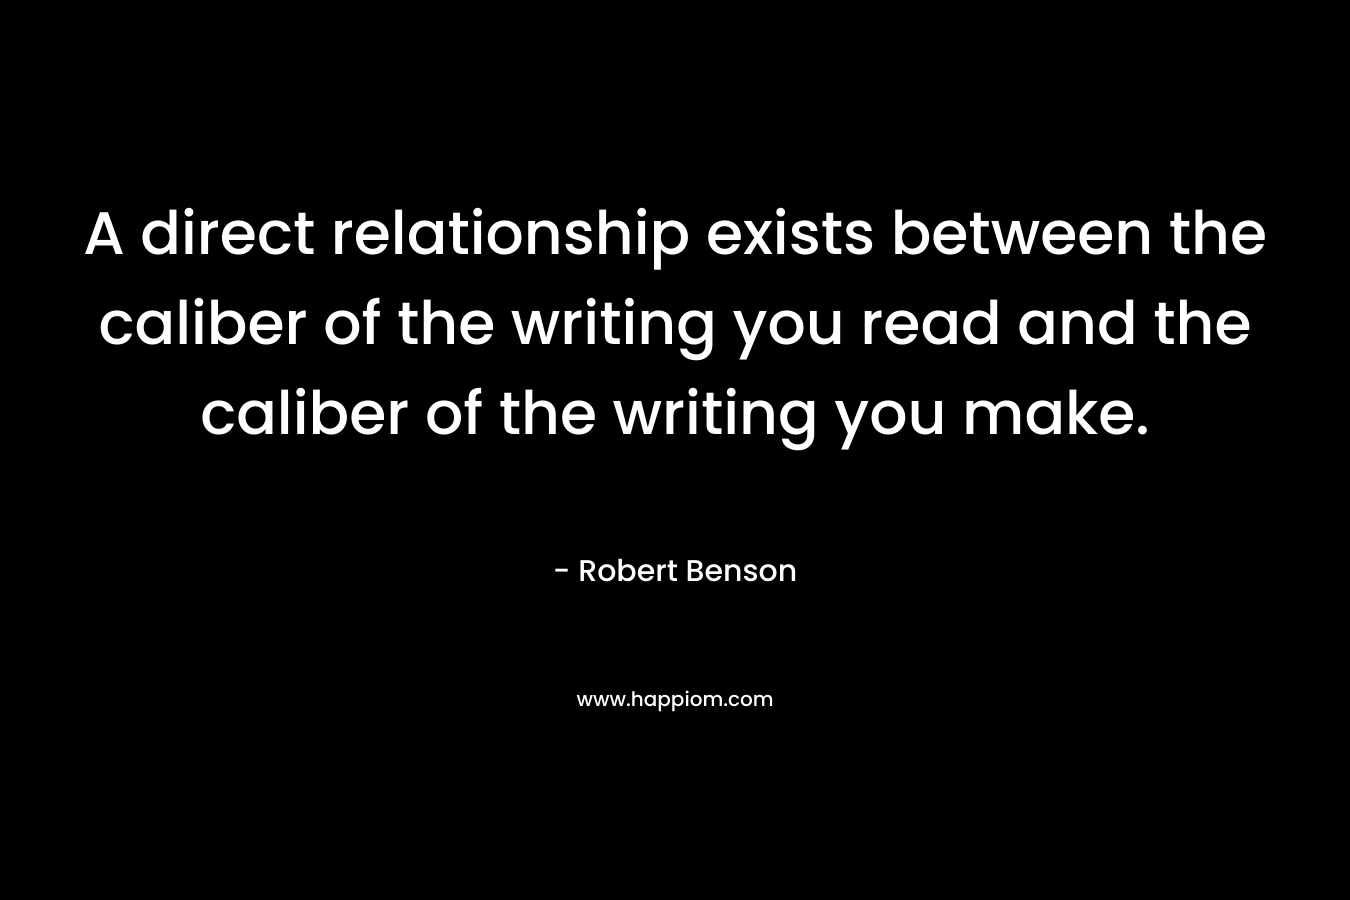 A direct relationship exists between the caliber of the writing you read and the caliber of the writing you make.